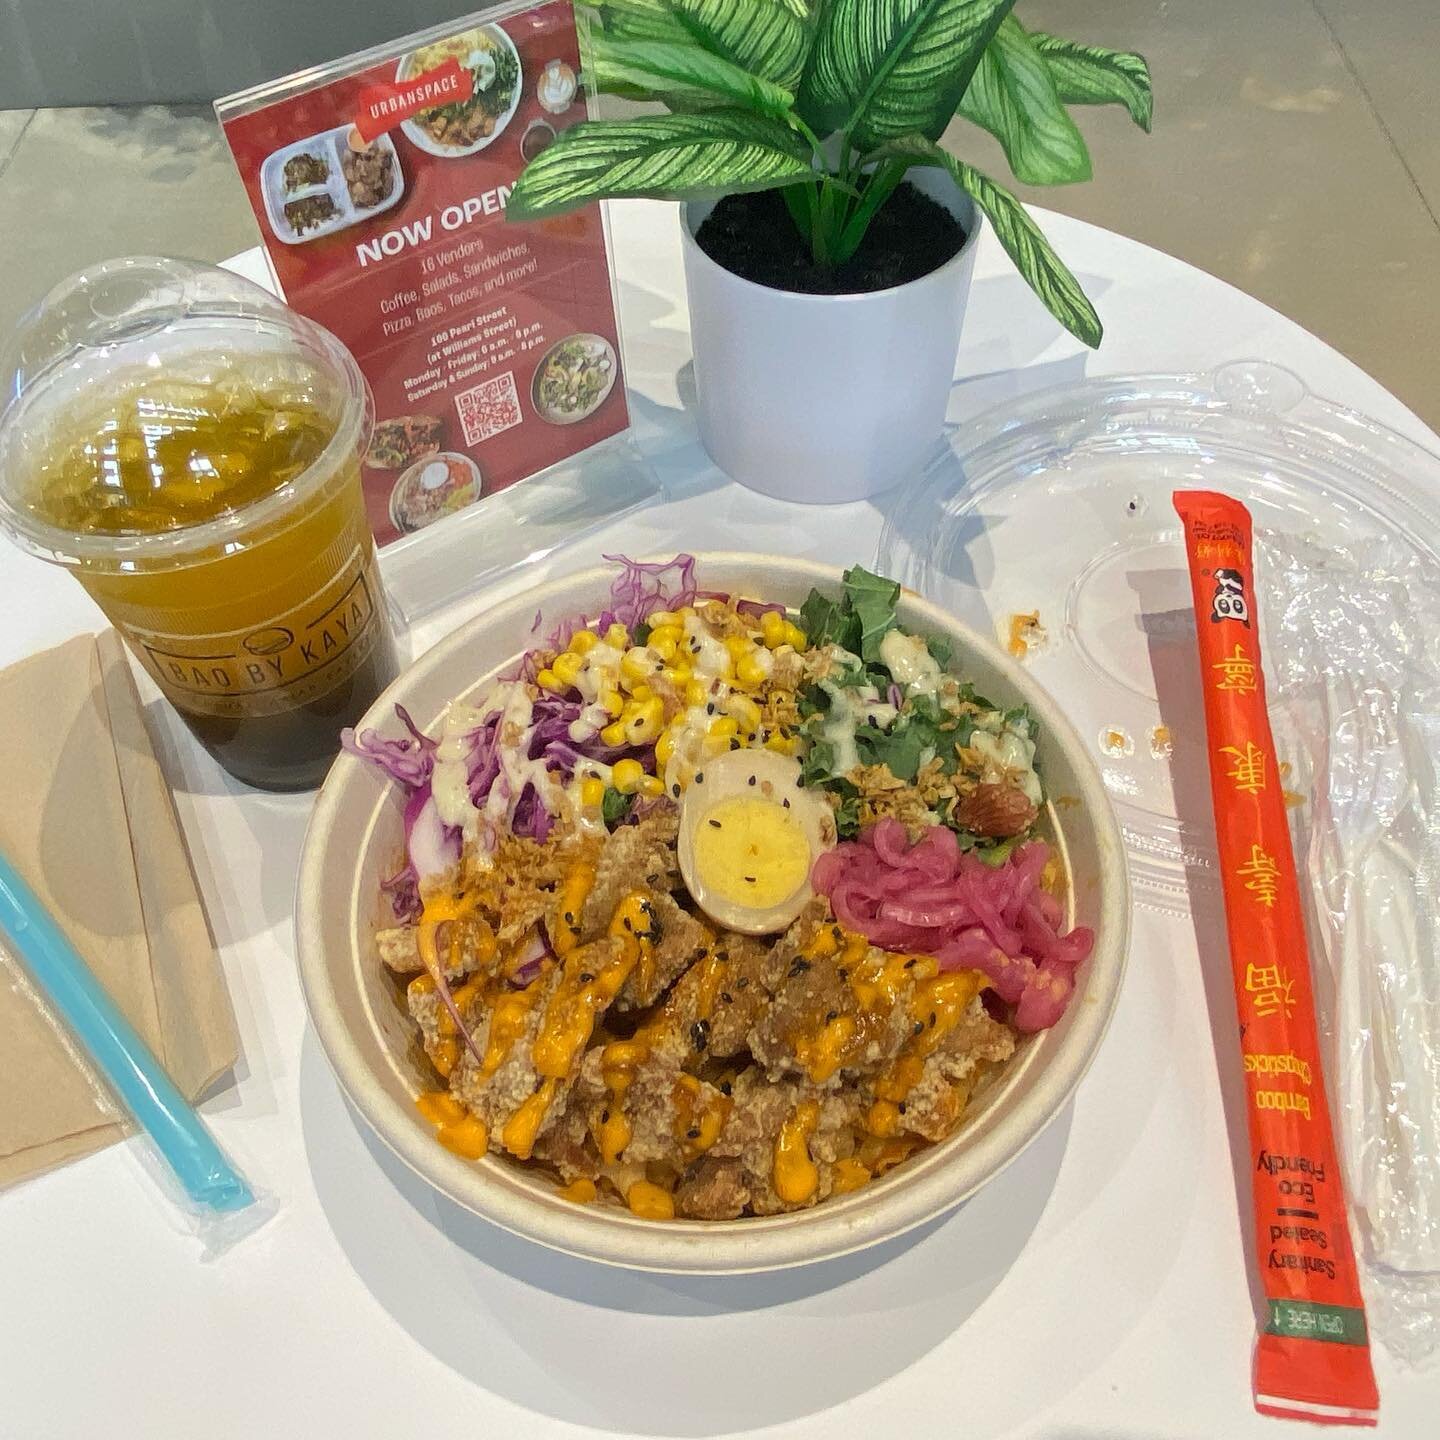 To live a full life , you have to fill your stomach first. This rice bowl+drink combos will satisfied your tummy😊😊
Popcorn chicken noodle bowl and passion green tea with boba🔥🔥😋😋
📍100 pearl street 
.
.
.
.
#food #foodporn #foodies #foodblogger